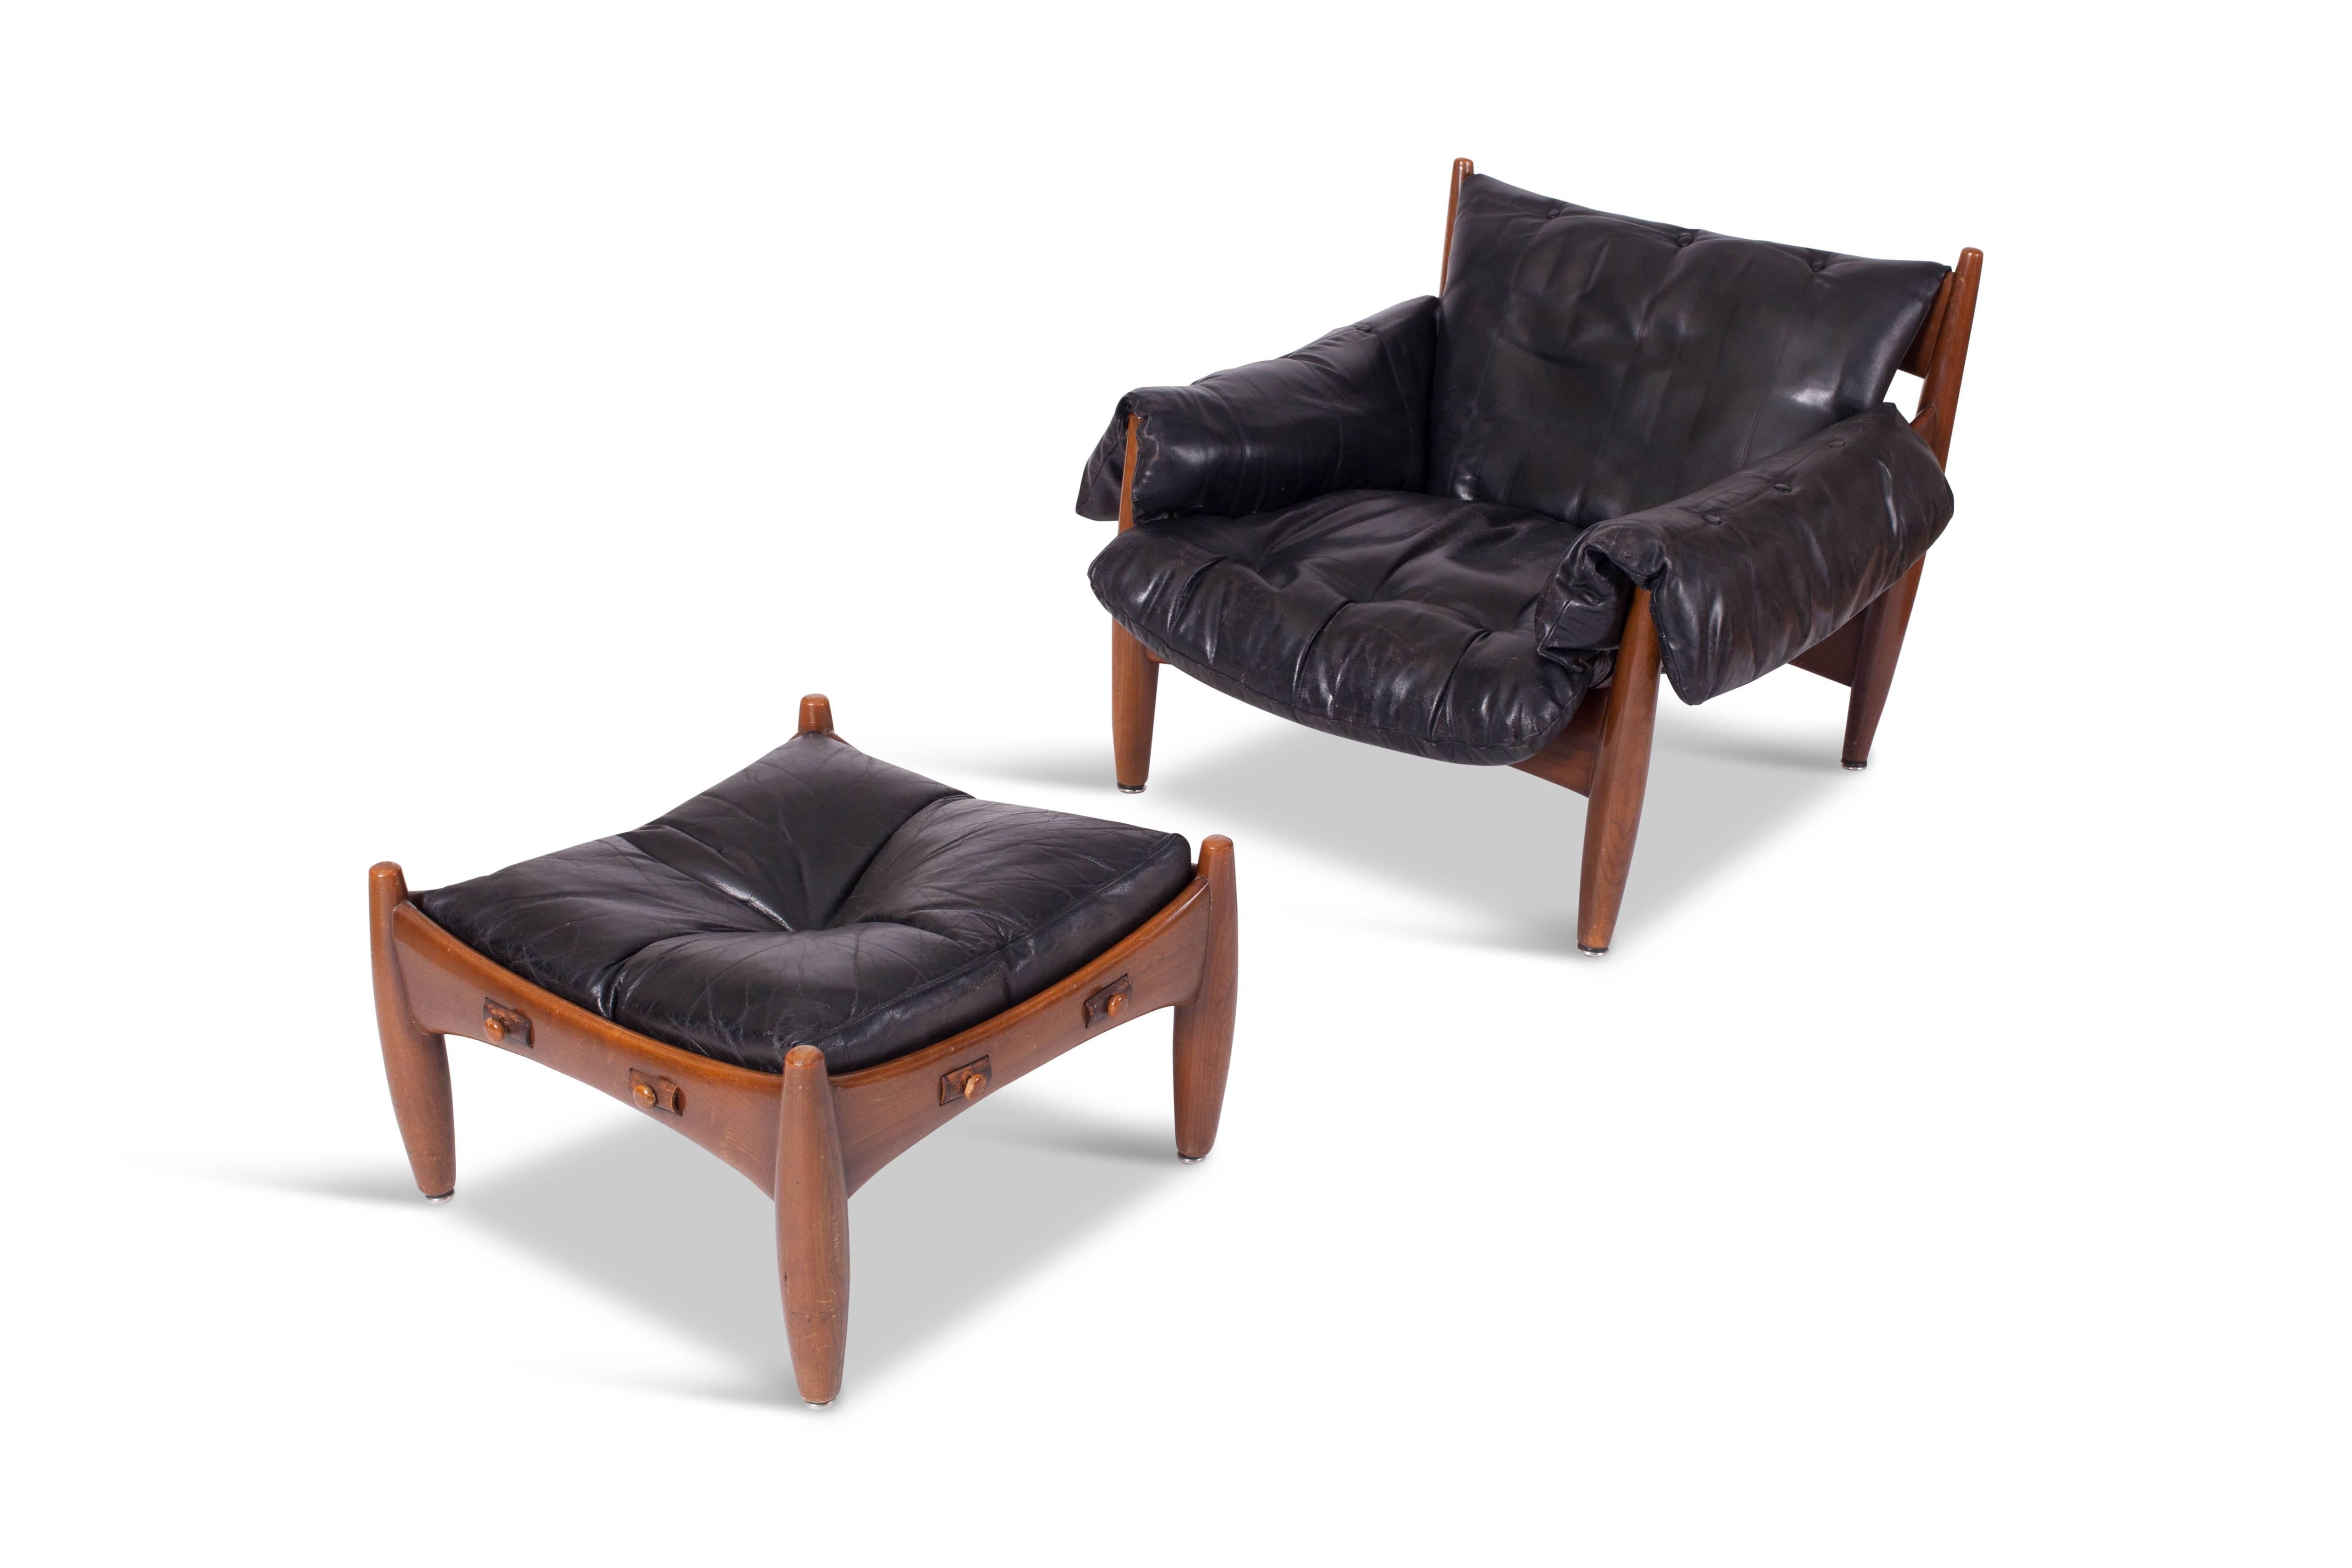  Sergio Rodrigues “Sheriff”Lounge chair and ottoman with solid jacaranda frame and thick natural
black leather seats by Brazilian architect and designer Sergio Rodrigues.
Manufactured by ISA, Italy, 1957.

The chair took first prize at the IV